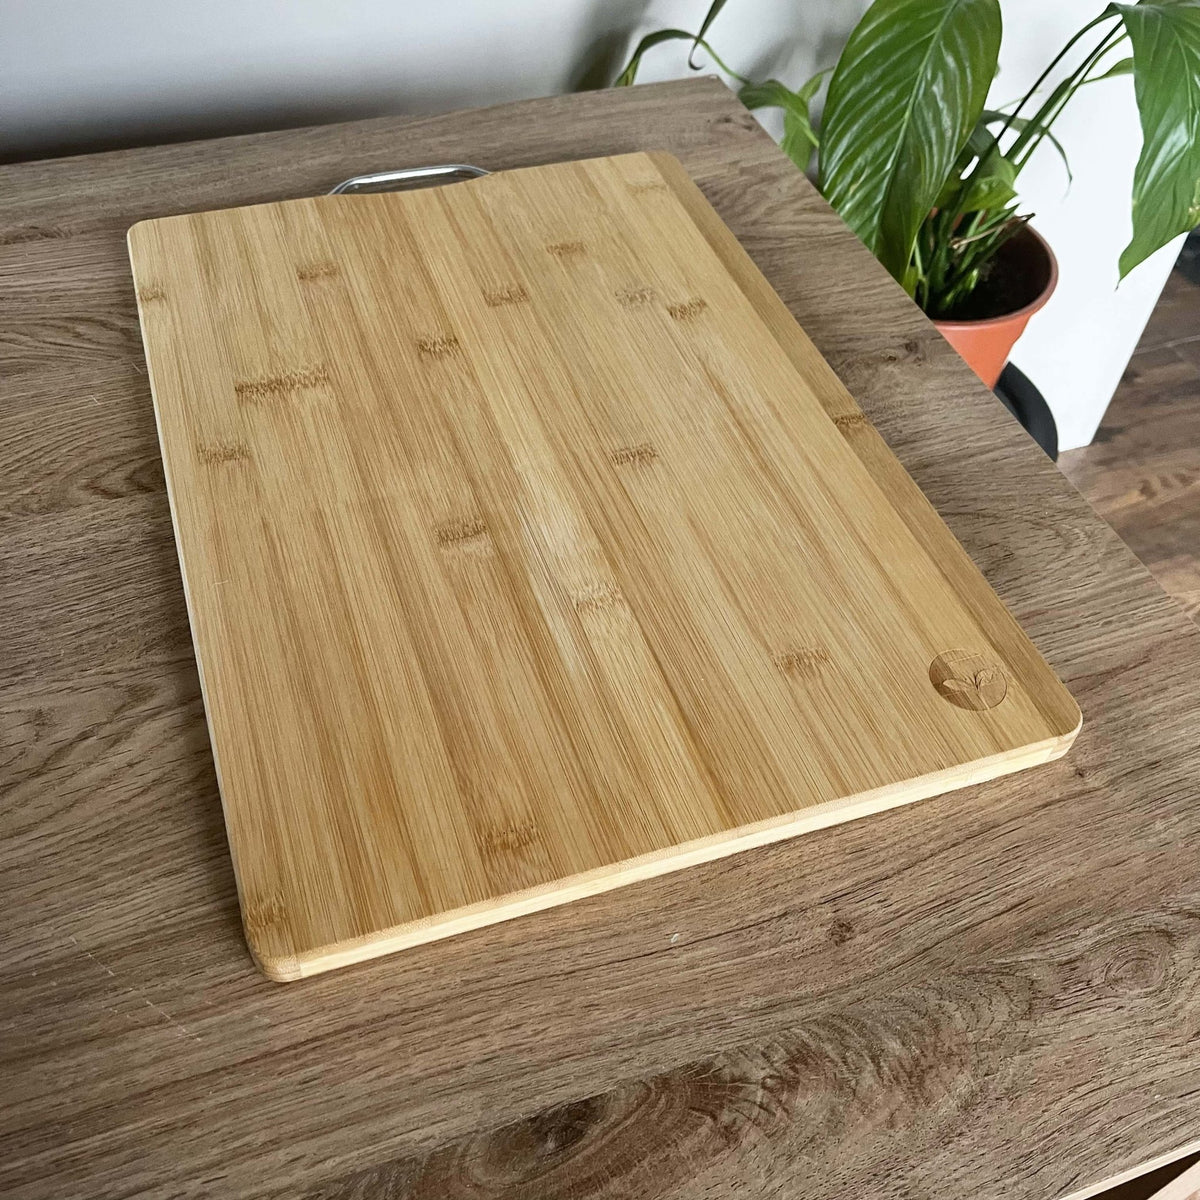 Large Bamboo Serving Board on wooden table